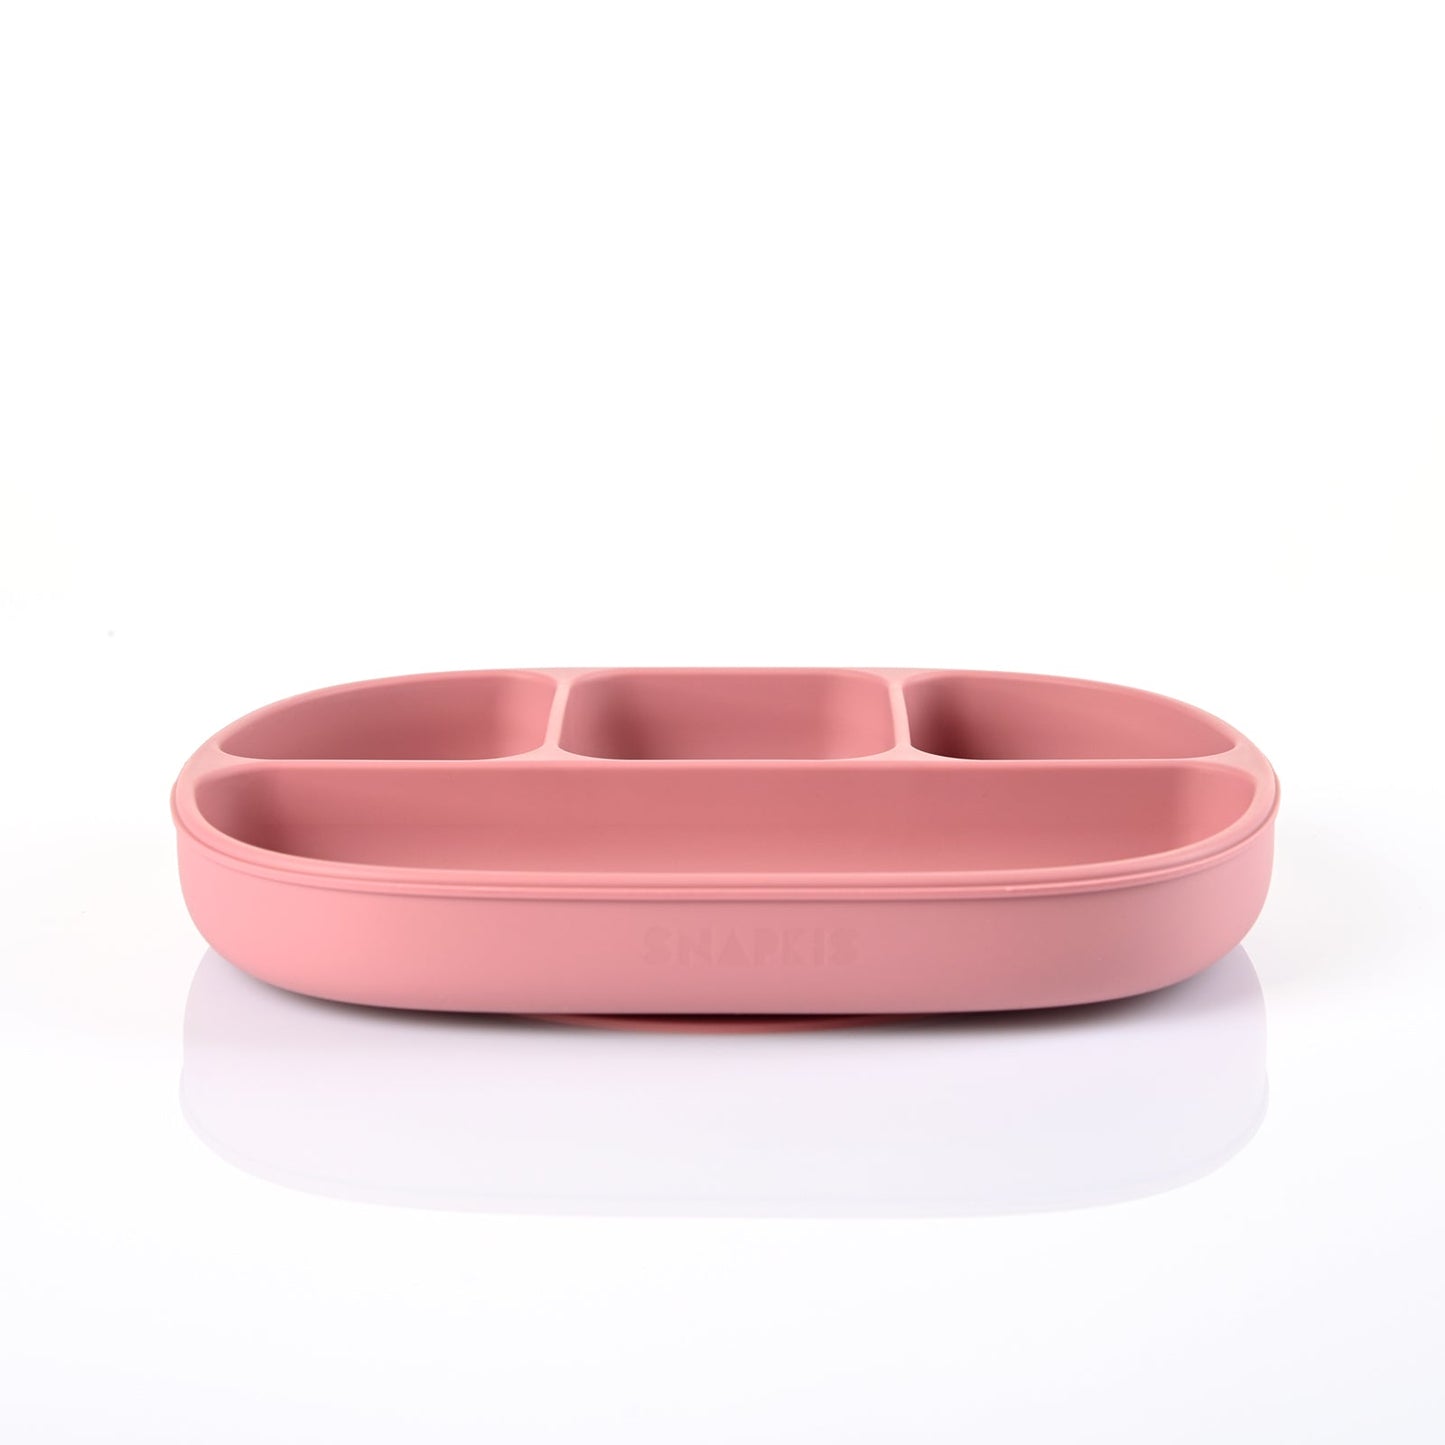 Silicone Suction Plate w/ Divider